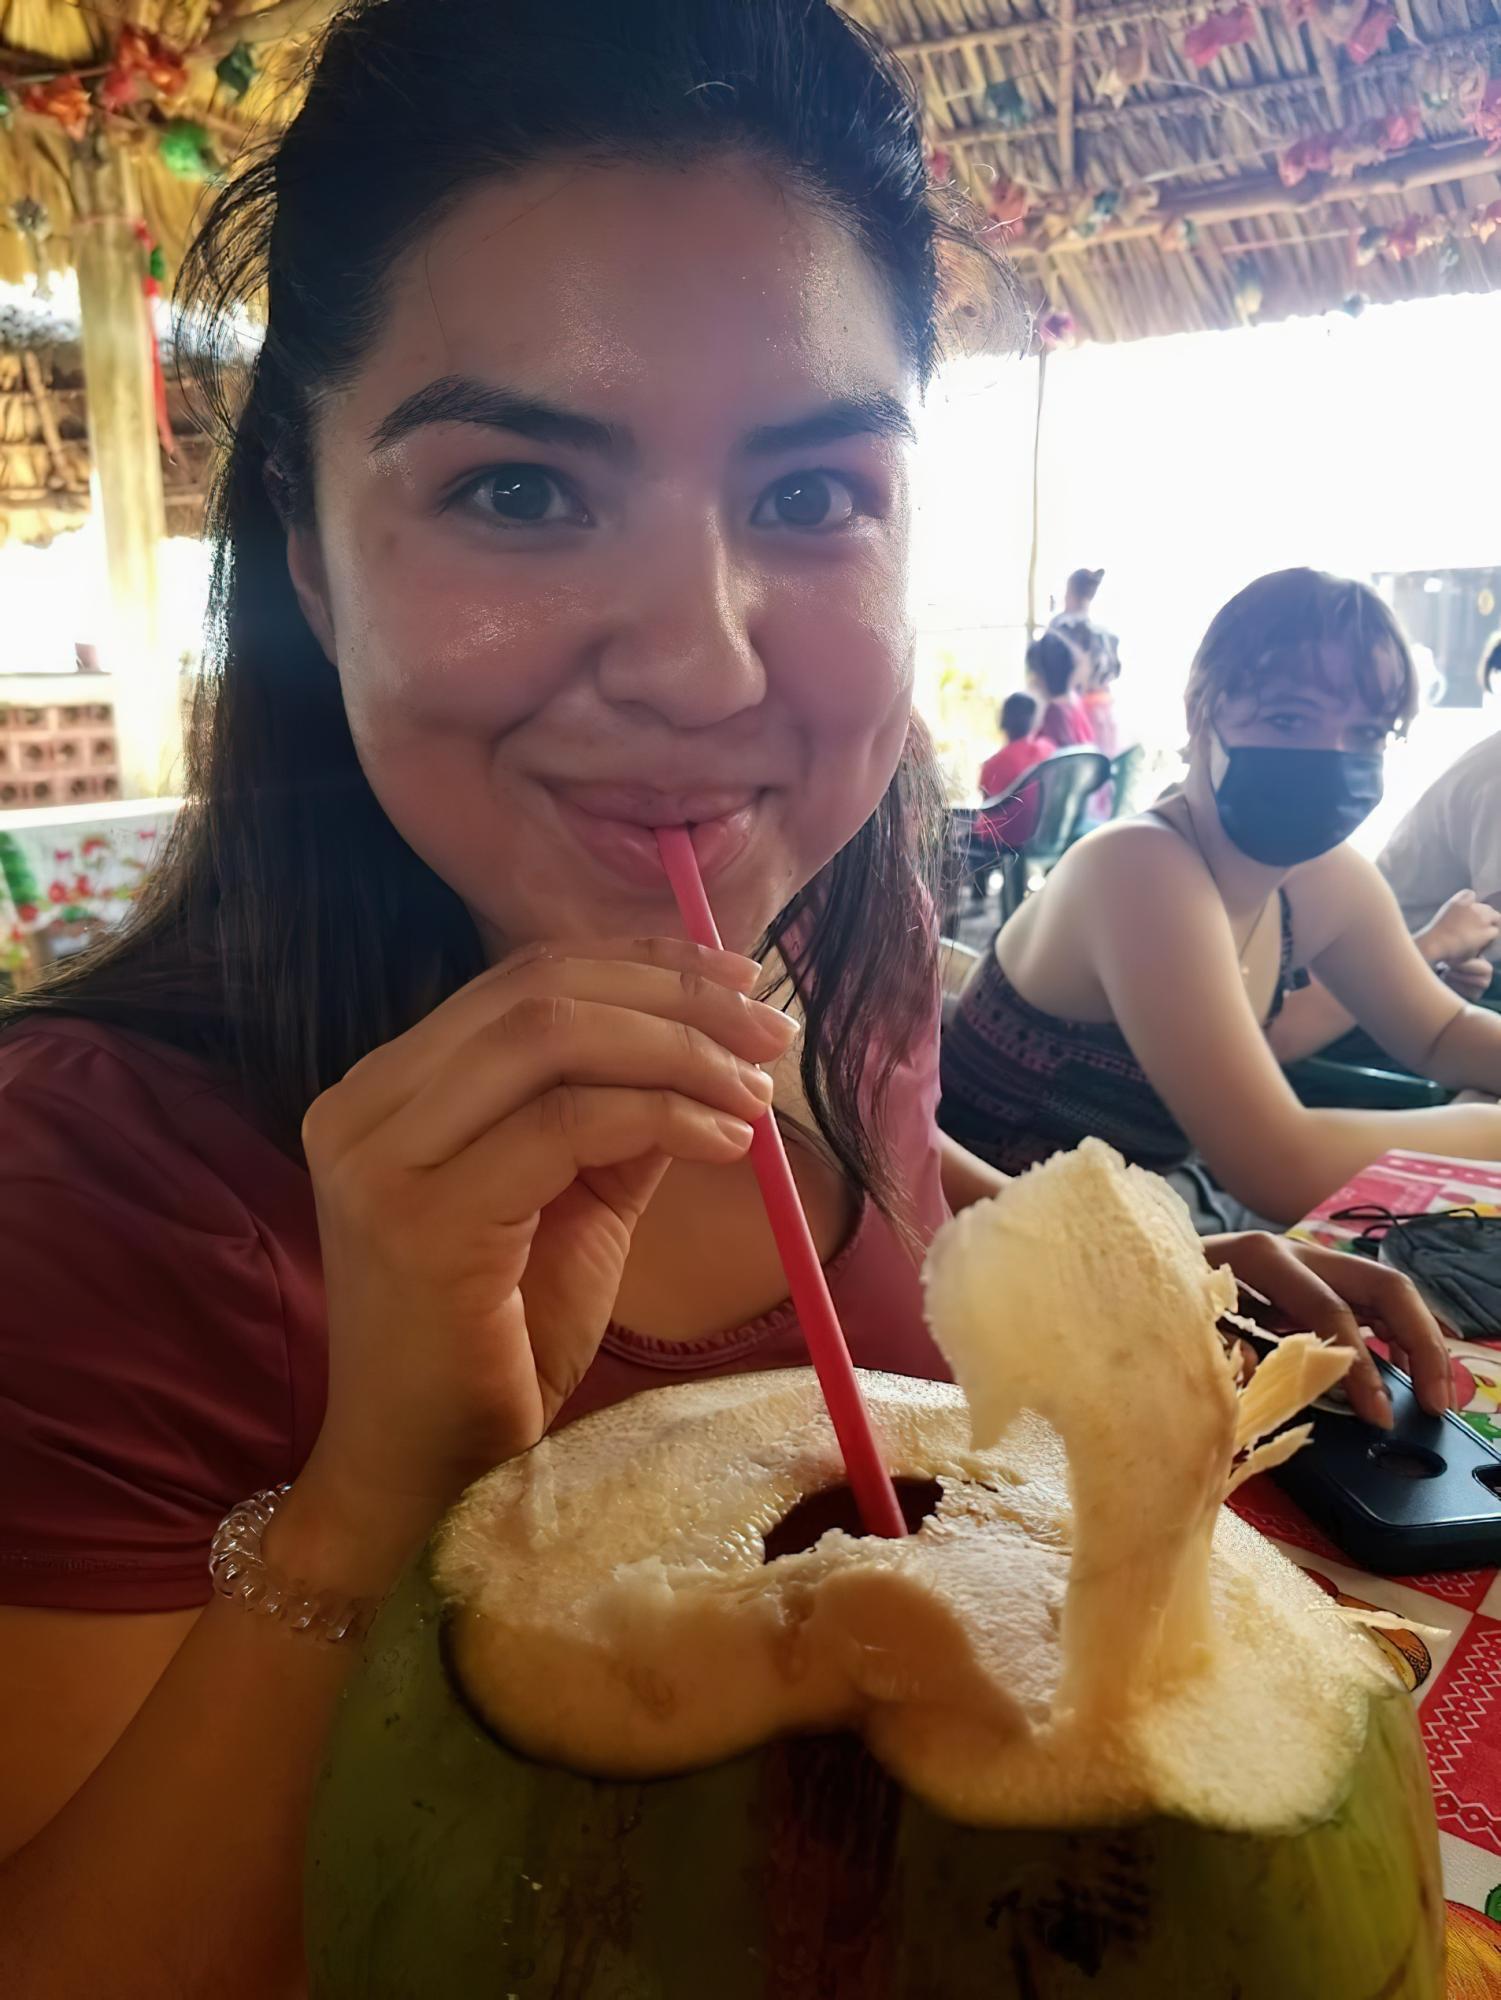 A young latinx woman drinking from a coconut